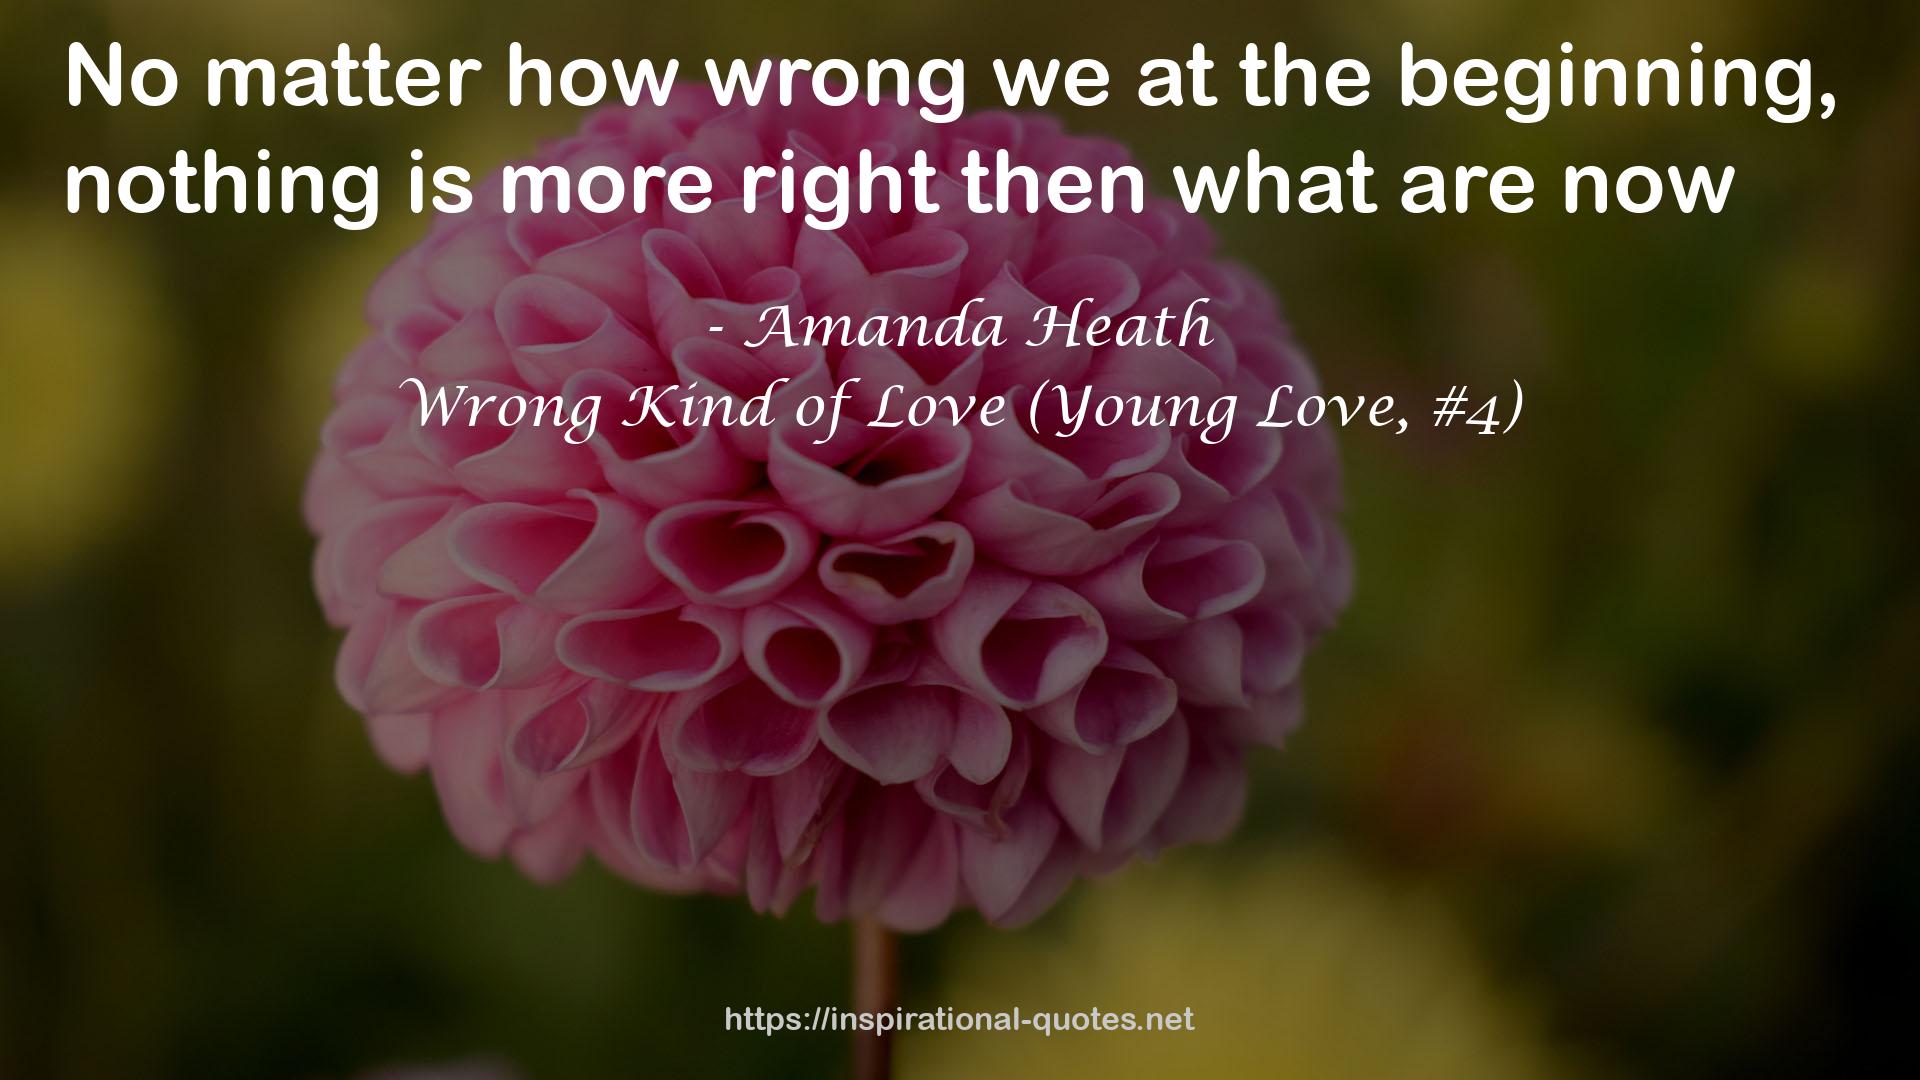 Wrong Kind of Love (Young Love, #4) QUOTES